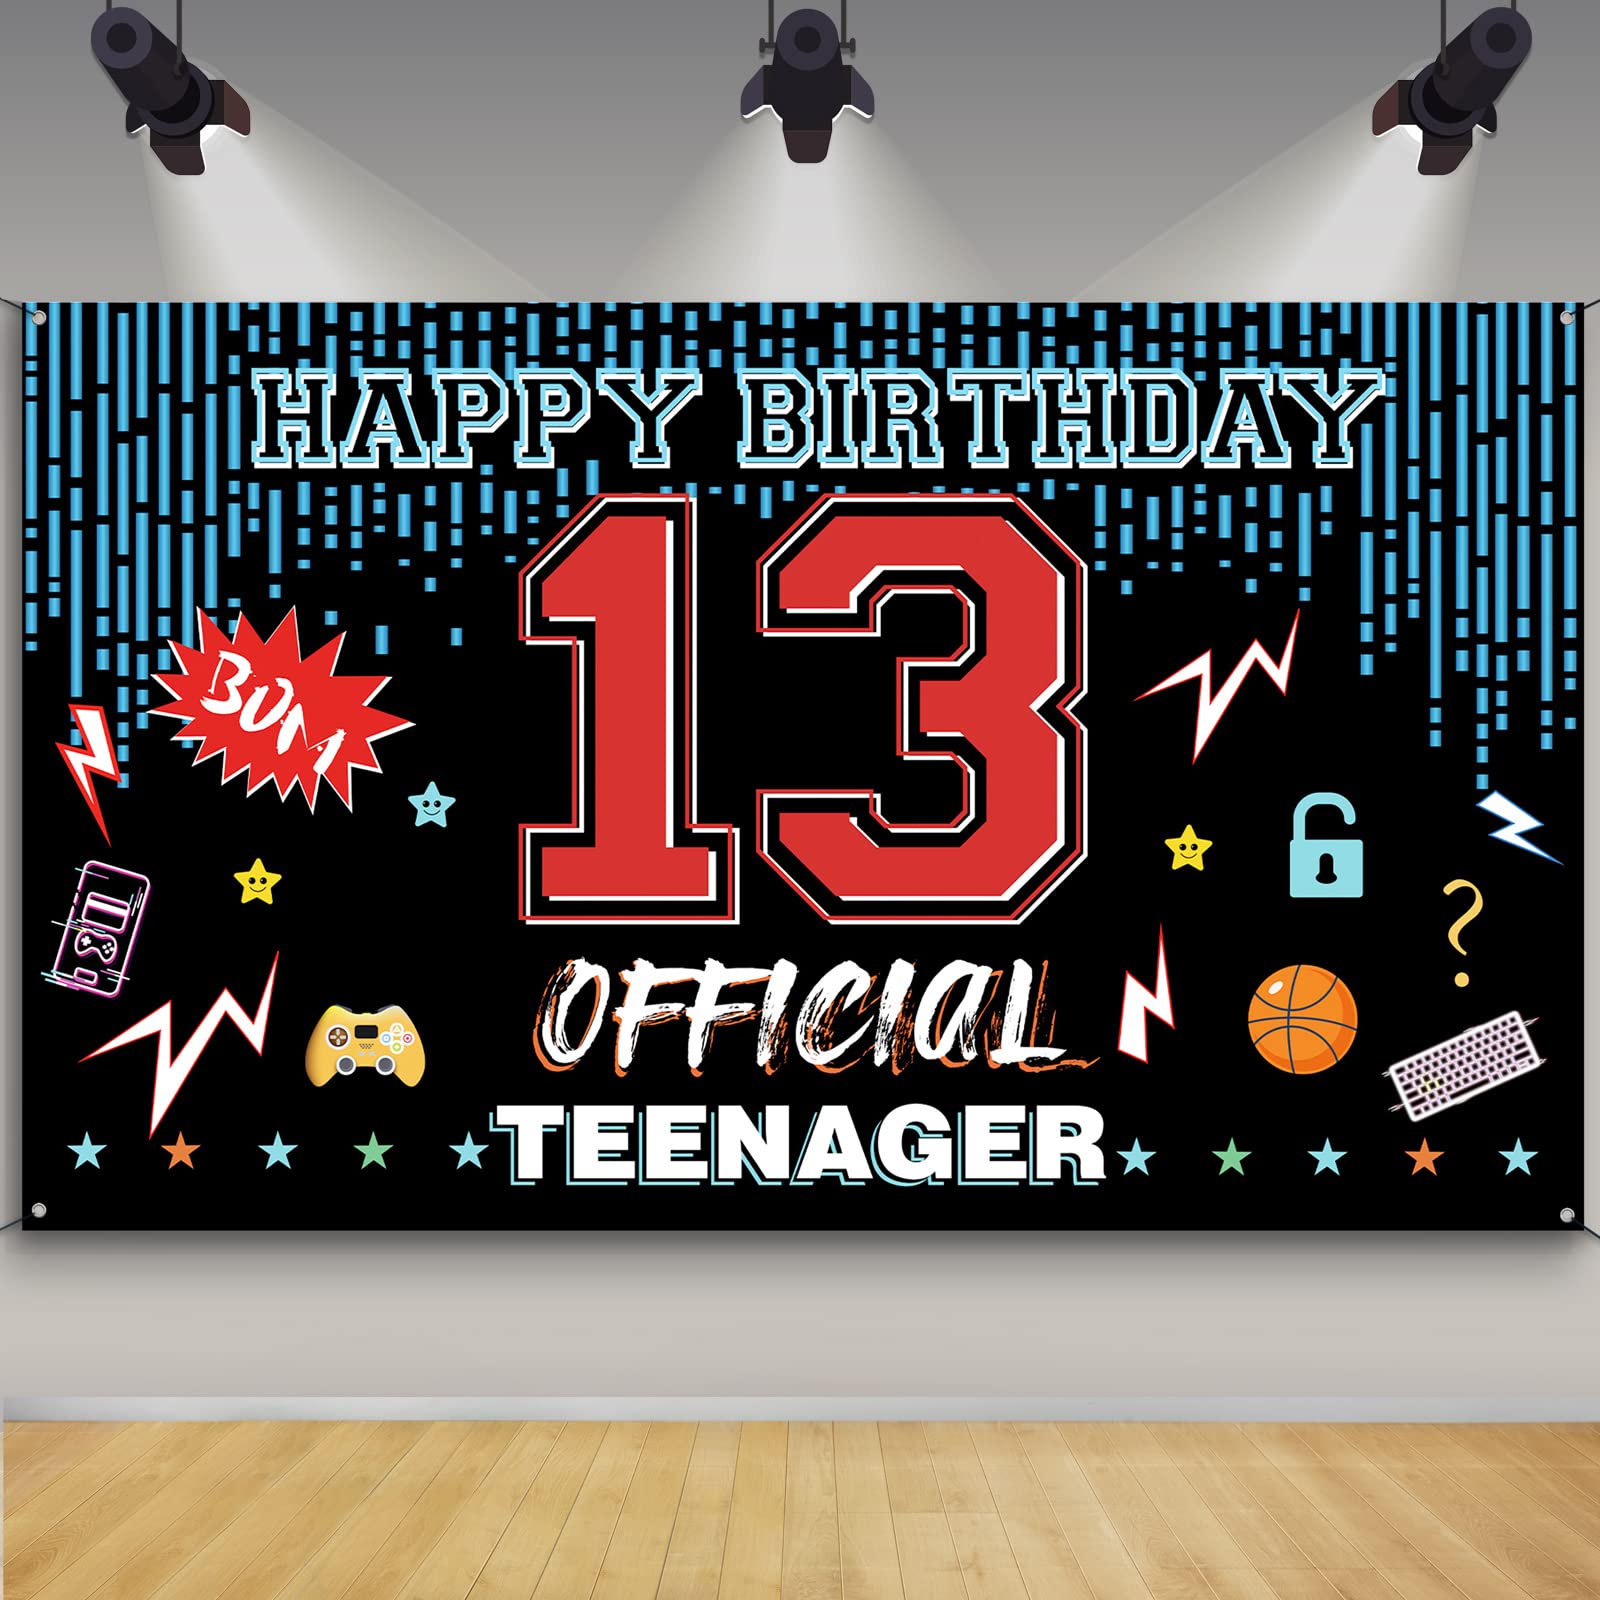 Official Teenager 13th Birthday Door Backdrop Banner, Happy 13th Birthday Decorations for Boys Girls, Red Blue 13 Year Old Birthday Party Yard Sign Photo Booth Props Supplies, Fabric, PHXEY